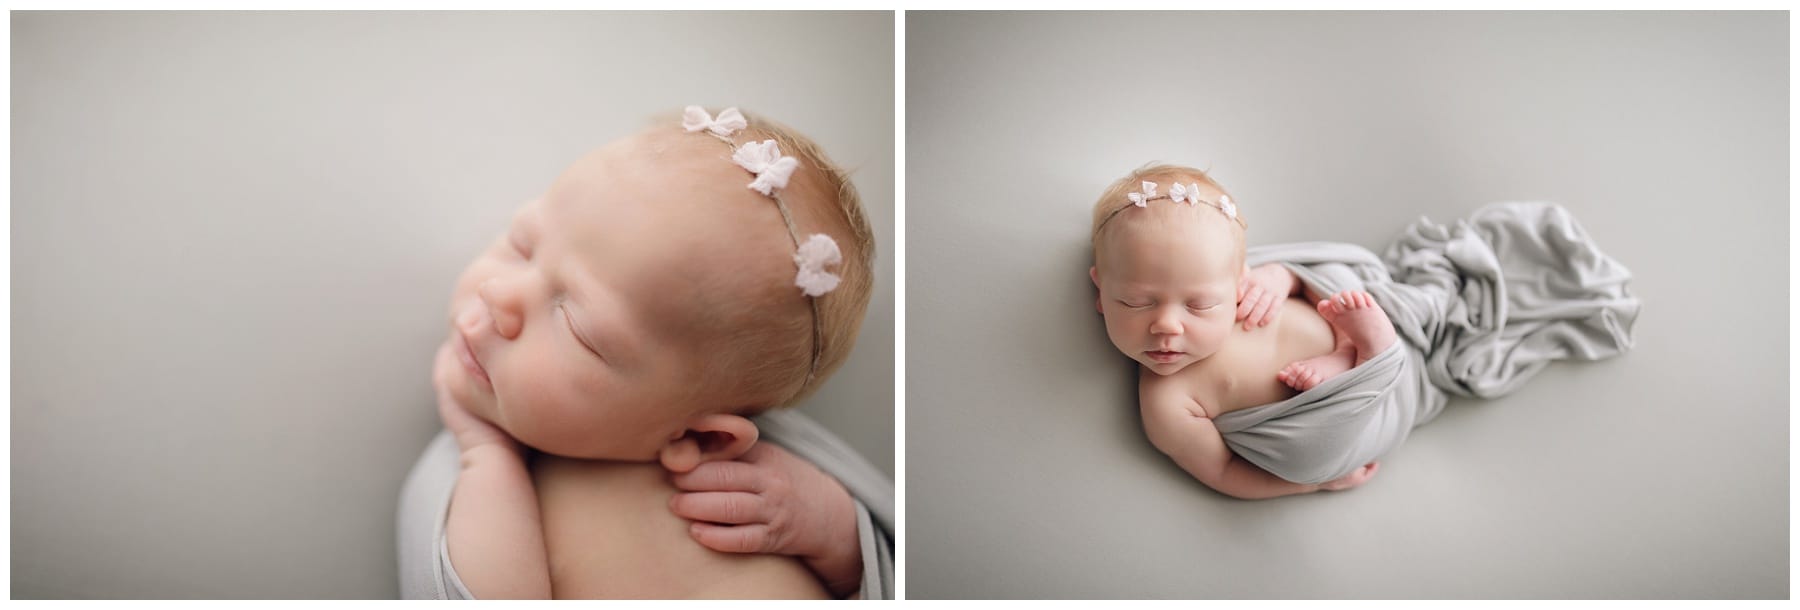 new baby photos sleeping baby firl with ginger hair on sage backdrop with delicate pink headband